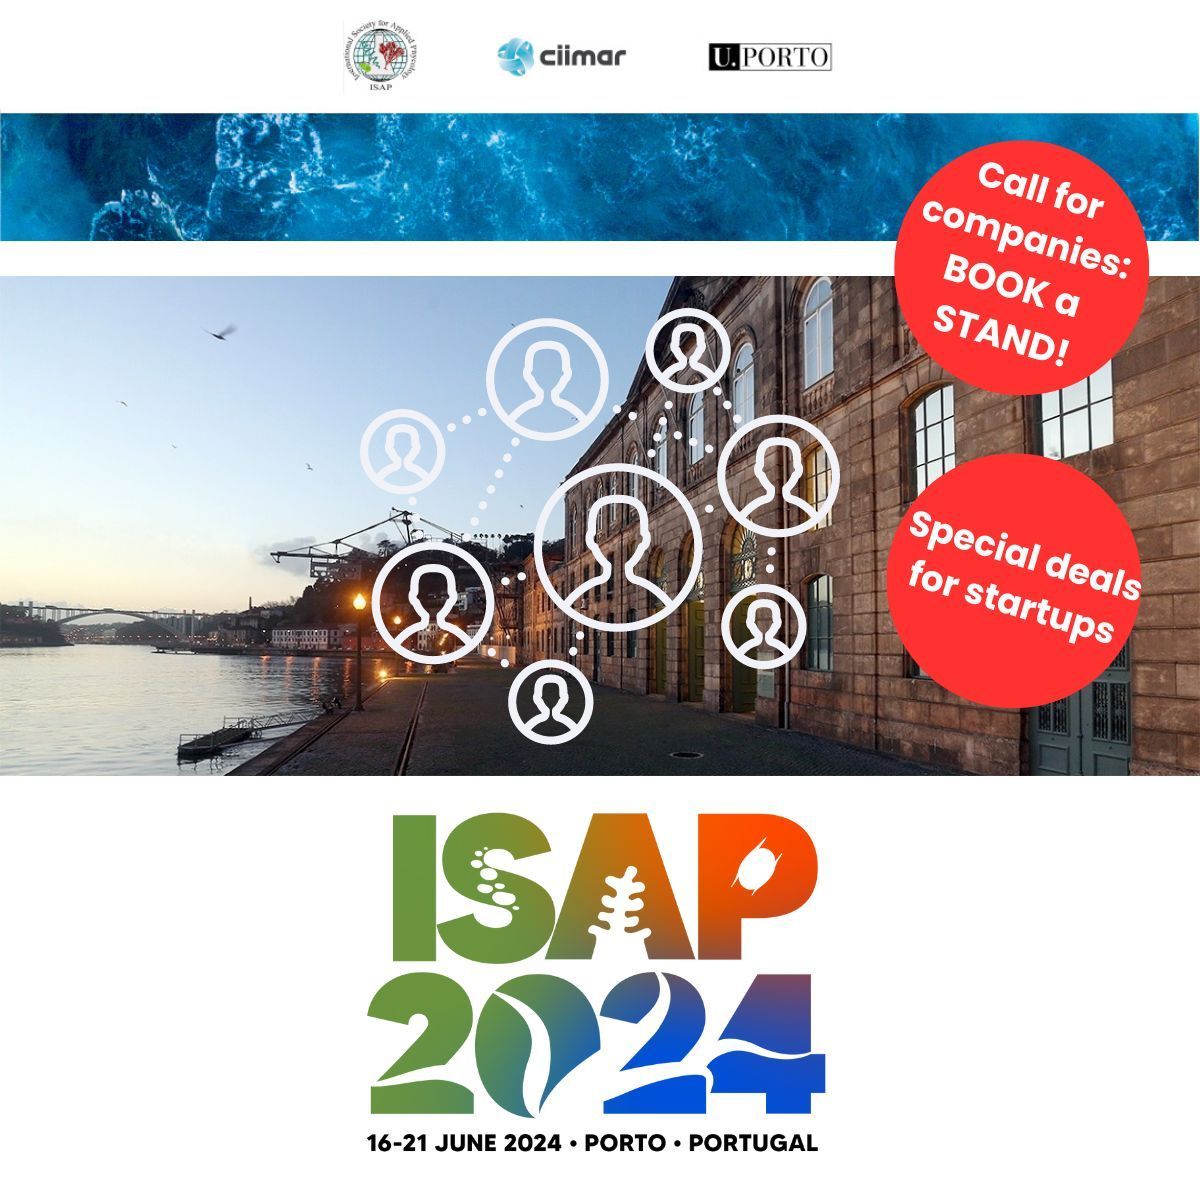 📢 Calling Companies & Startups Exhibit at #ISAP2024
Early Bird fees still apply for Exhibition Stands!

For more details, contact algae@isap2024.com
#ISAP #CIIMAR # algae #macroalage #microalage #algaeconference #blueeconomy #bluebioeconomy #porto #portugal #phdstudent #ISAP2024